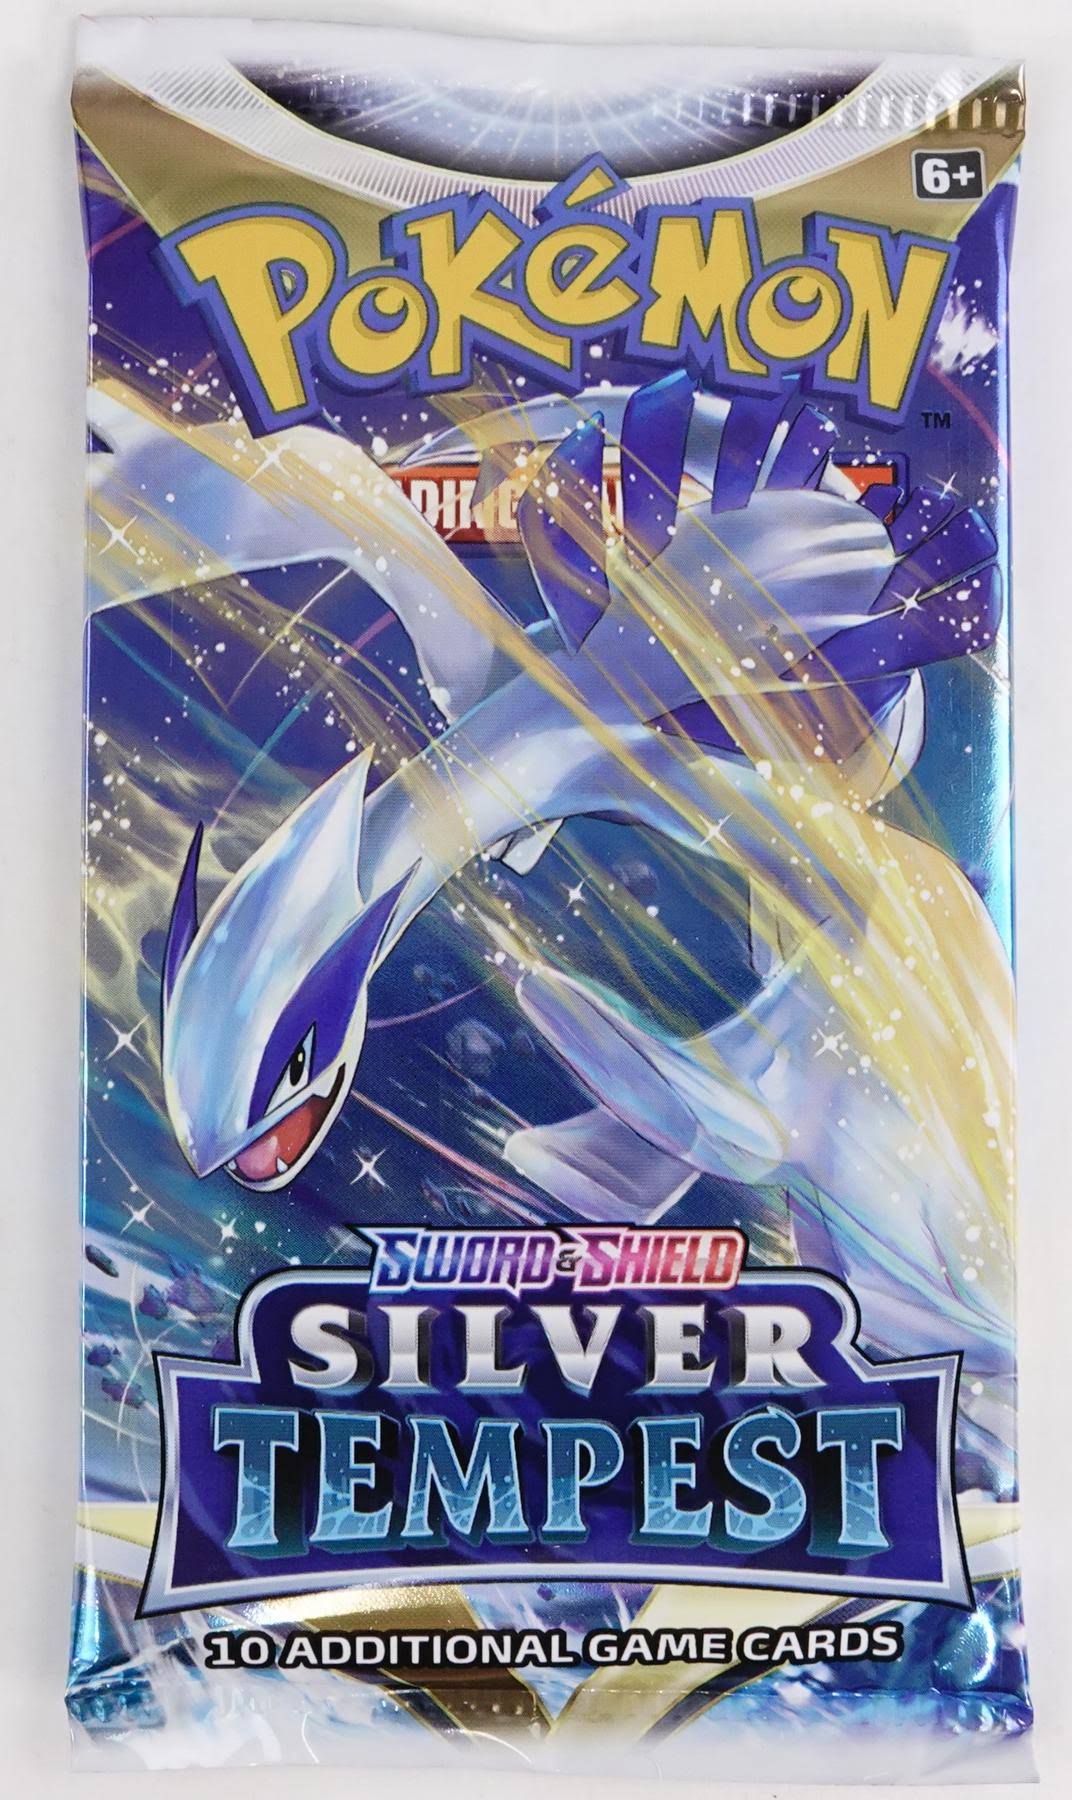 Pokemon - Sword & Shield - Silver Tempest - Booster Pack